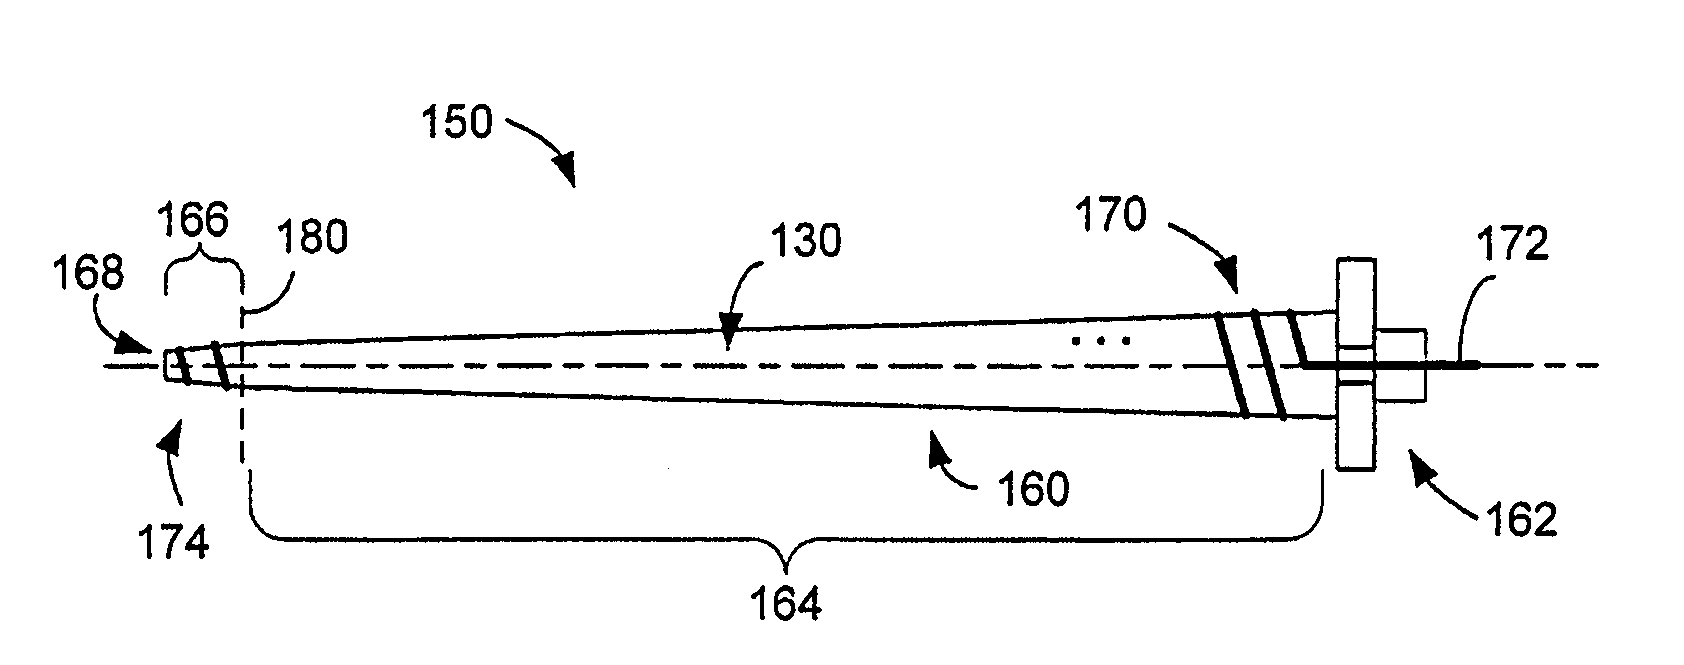 Rotation-independent helical antenna